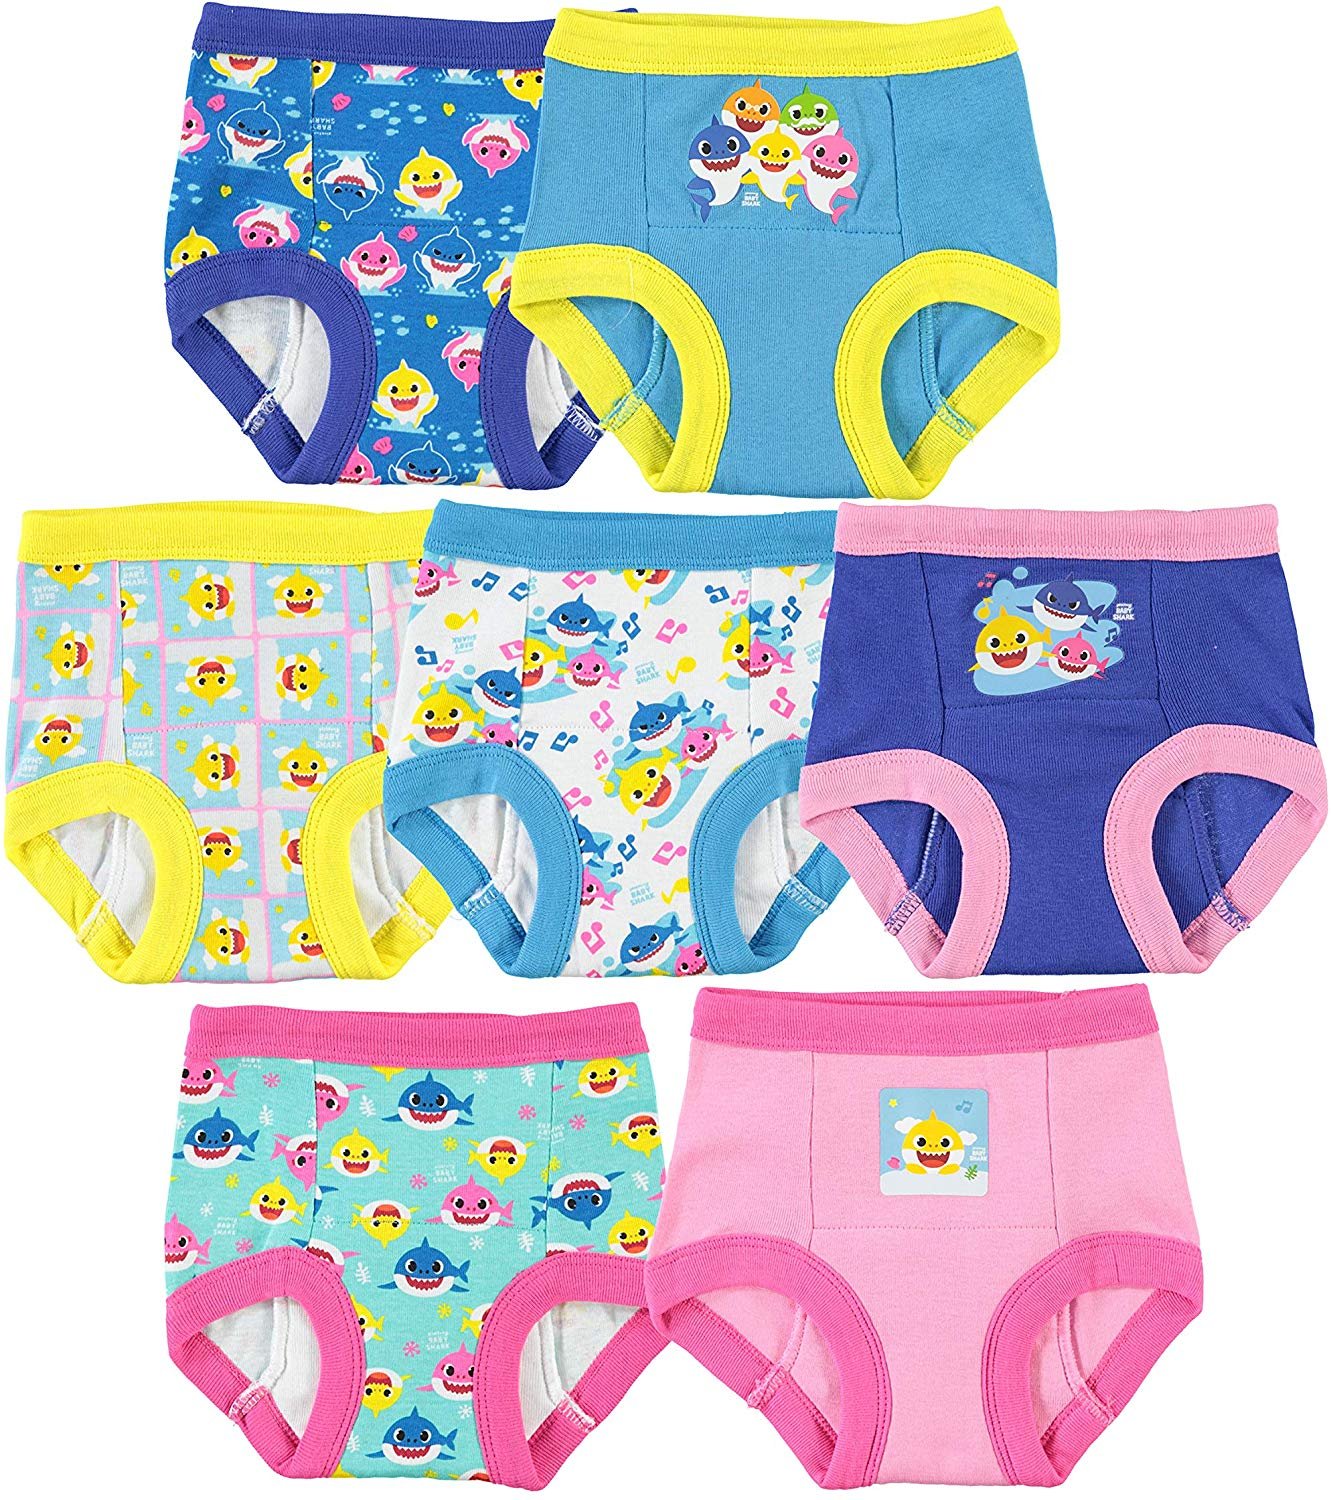 Potty Training Pant (Explorer) for Baby by SuperBottoms